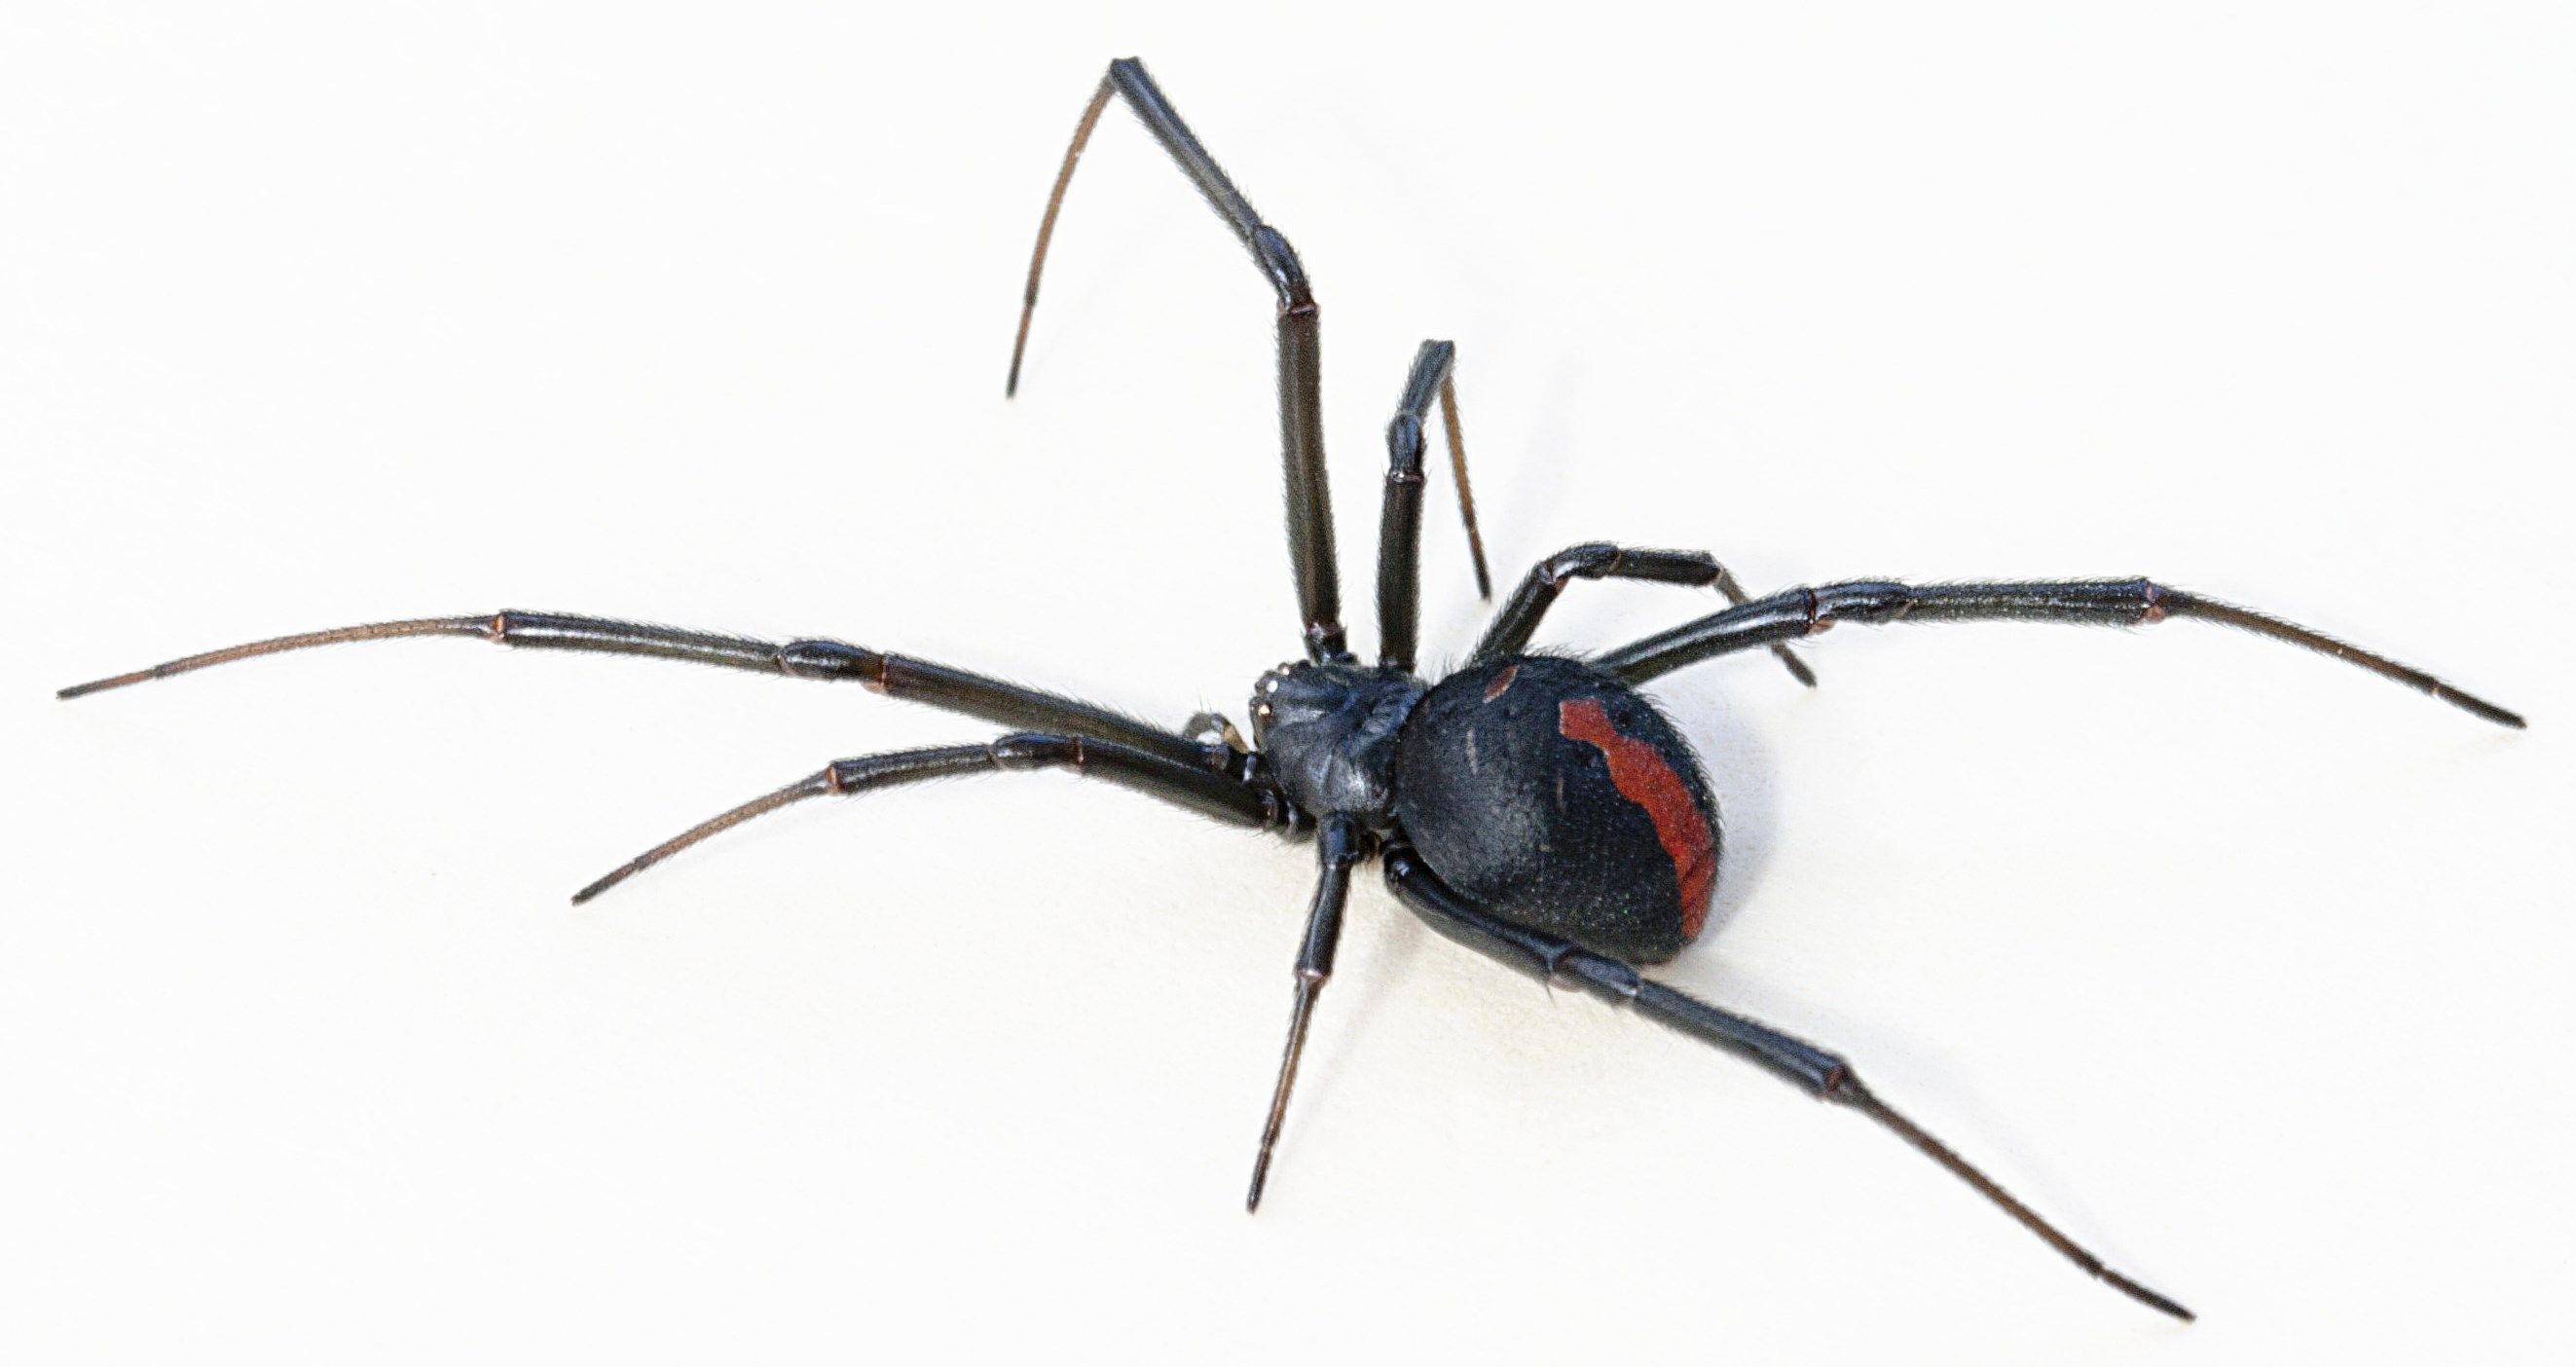 Black Widow Spiders Wallpapers FREE Pictures on GreePX.